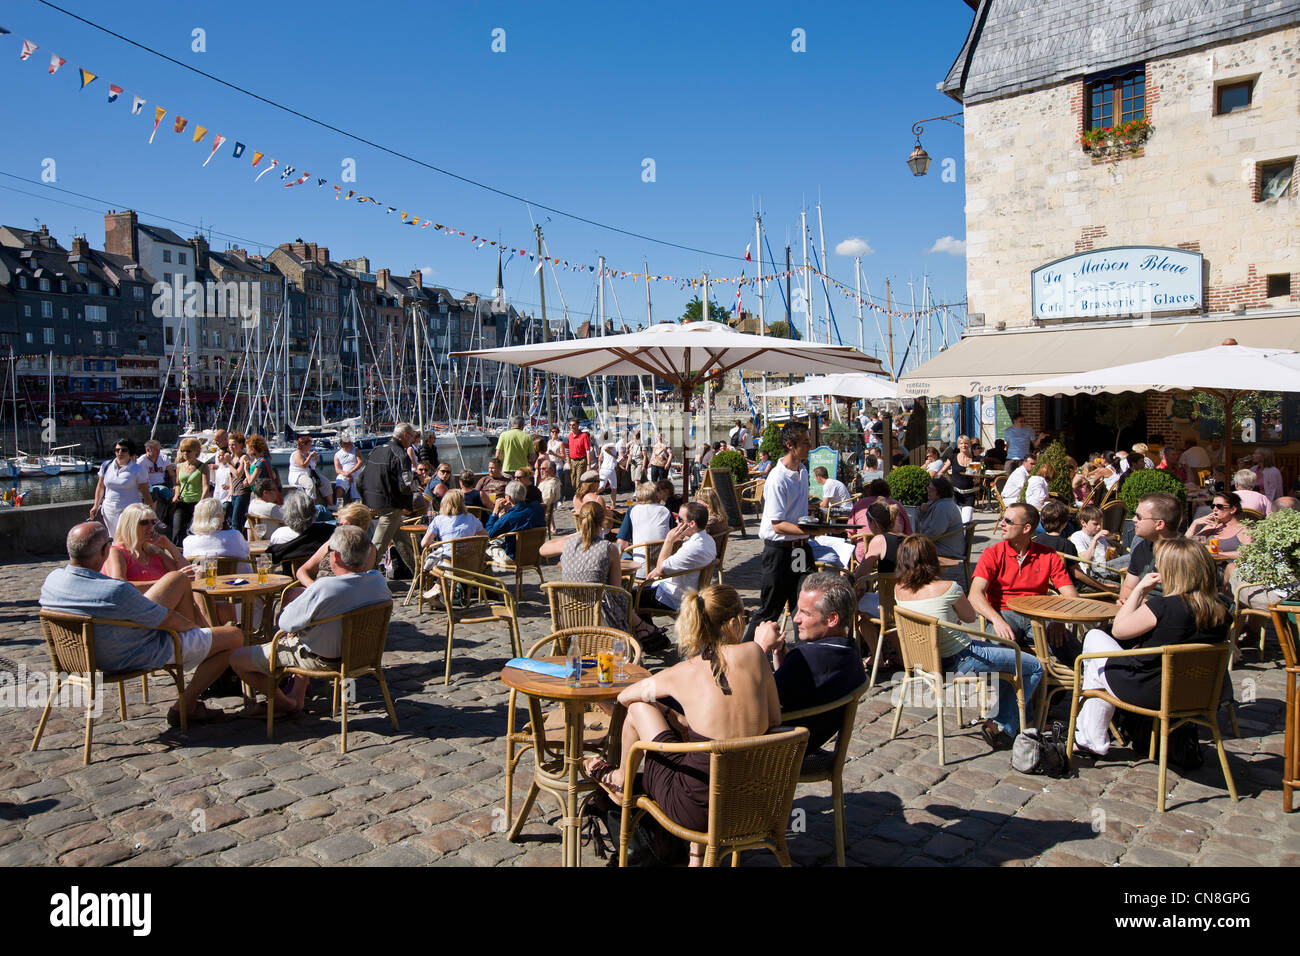 France, Calvados, Honfleur, La Maison Bleue restaurant and customers sitting on the terrace with the old port in the background Stock Photo